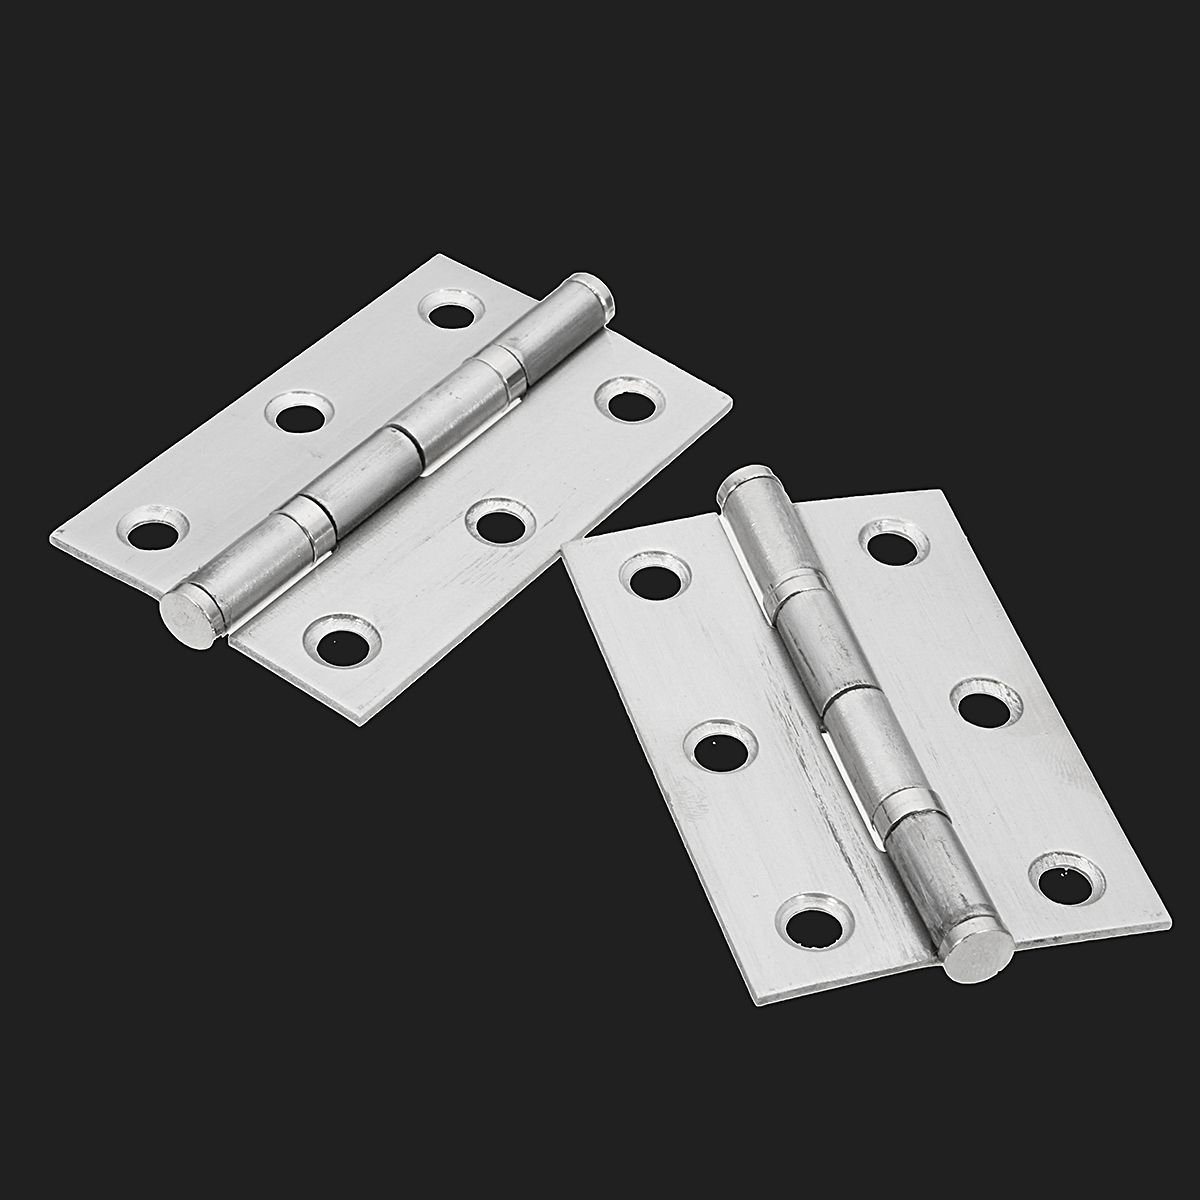 6Pcs-25Inch-Stainless-Steel-Boat-Marine-Cabinet-Butt-Hinge-With-Screws-1114196